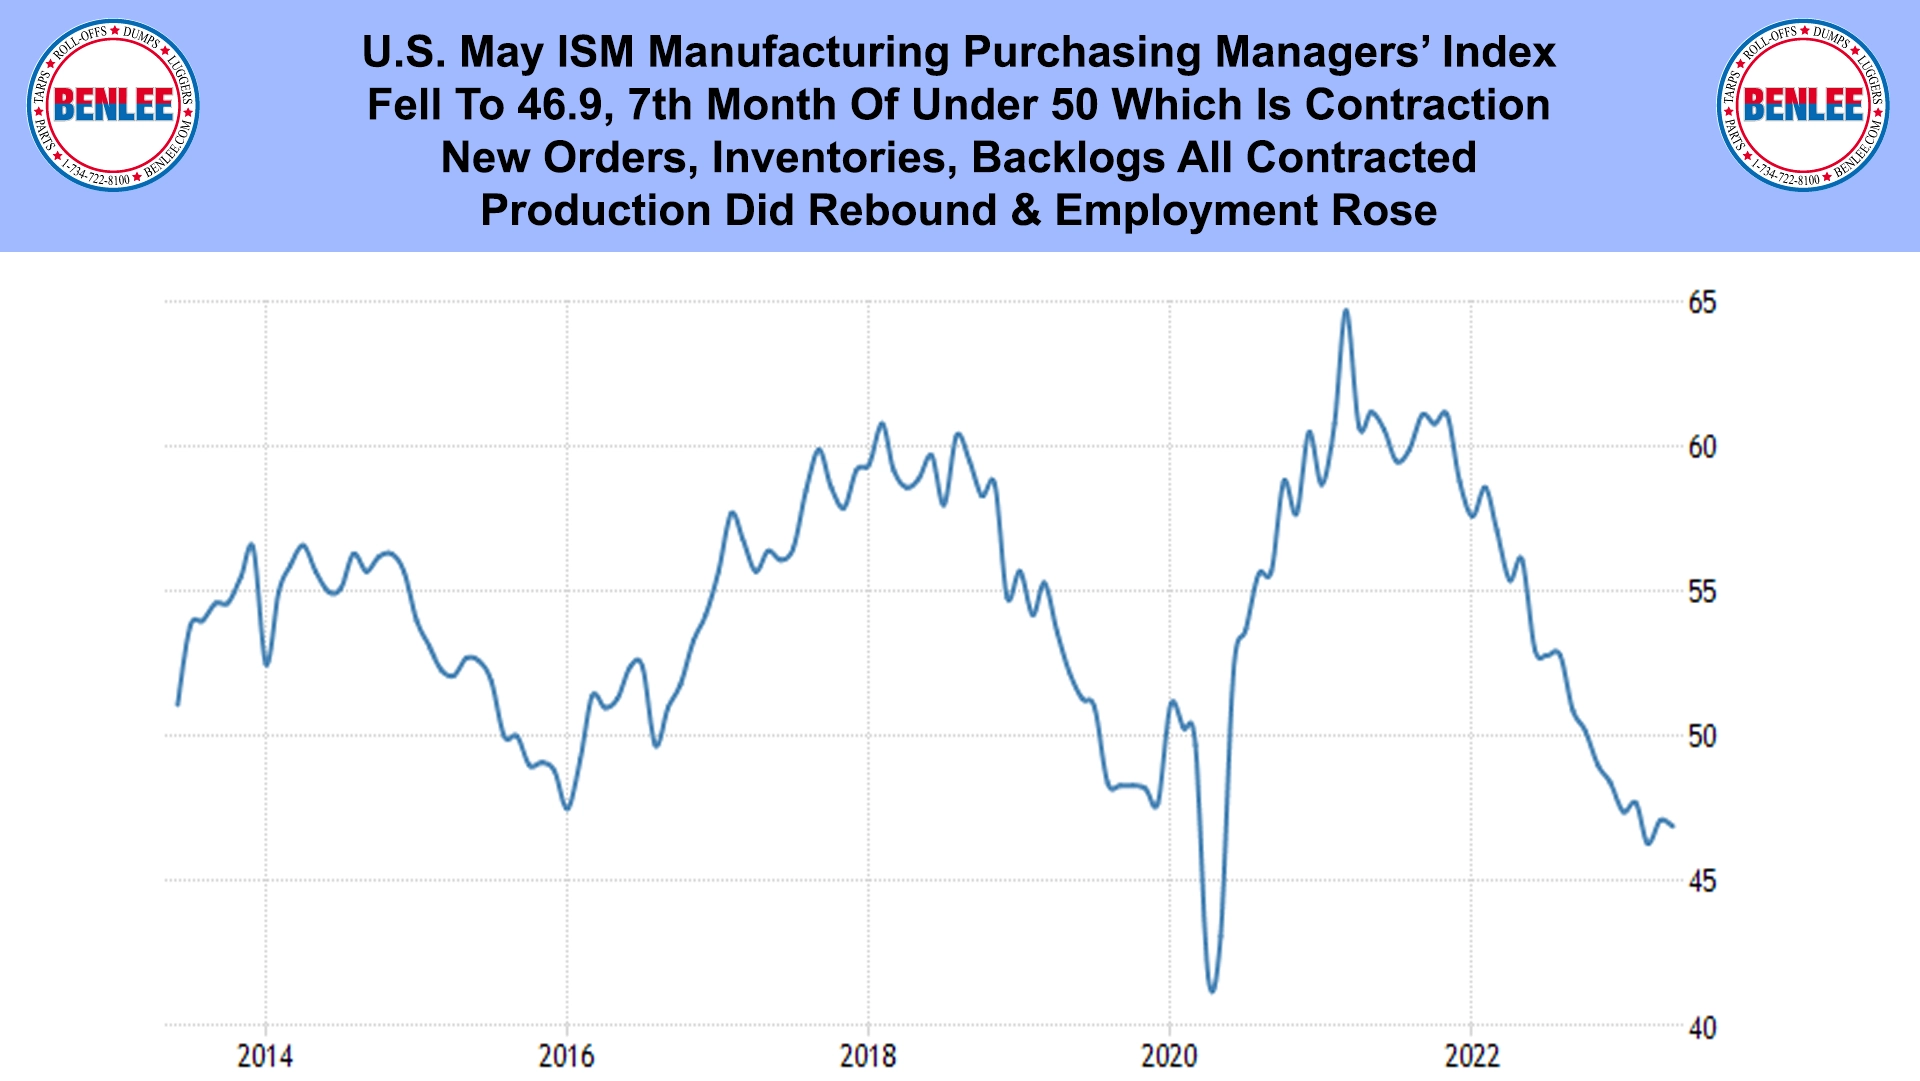 U.S. May ISM Manufacturing Purchasing Managers’ Index